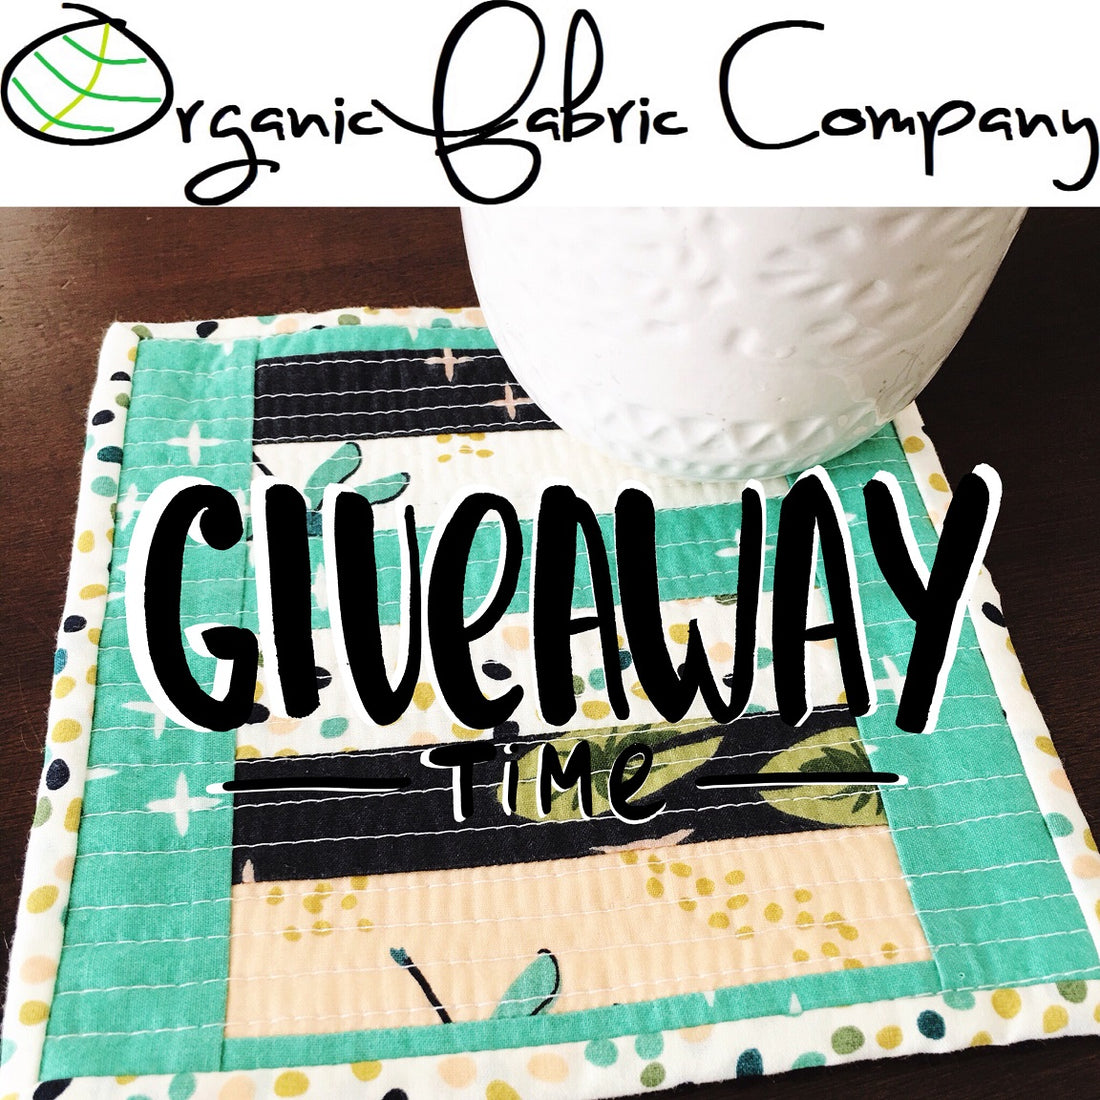 Our March Giveaway is Live: Enter Here!